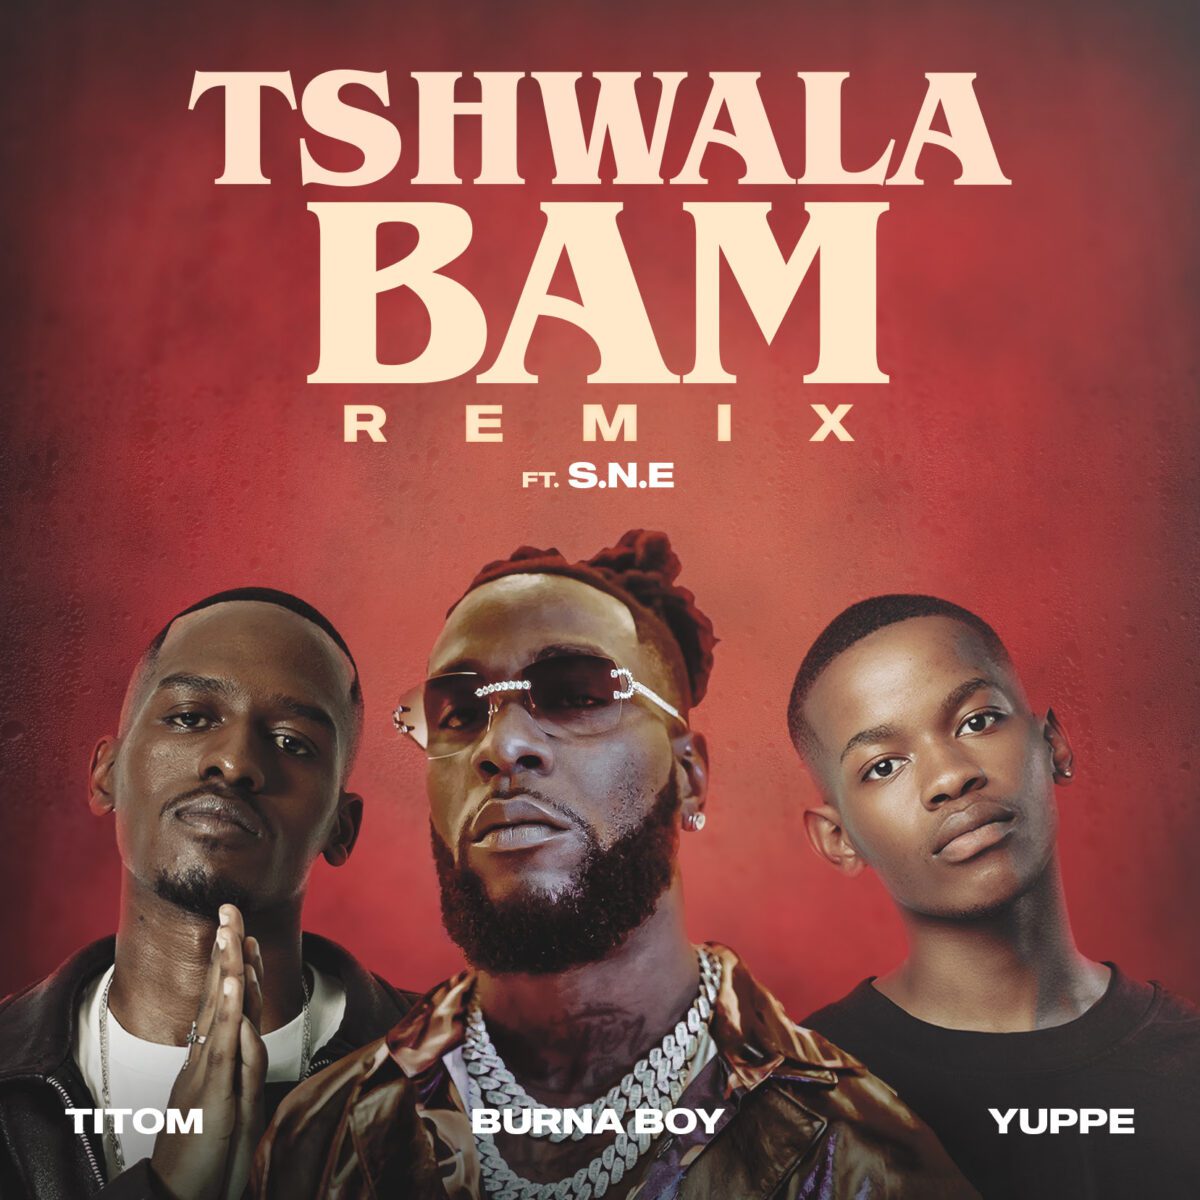 Burna Boy Joins Forces for Electrifying "Tshwala Bam" Remix Video Release 4